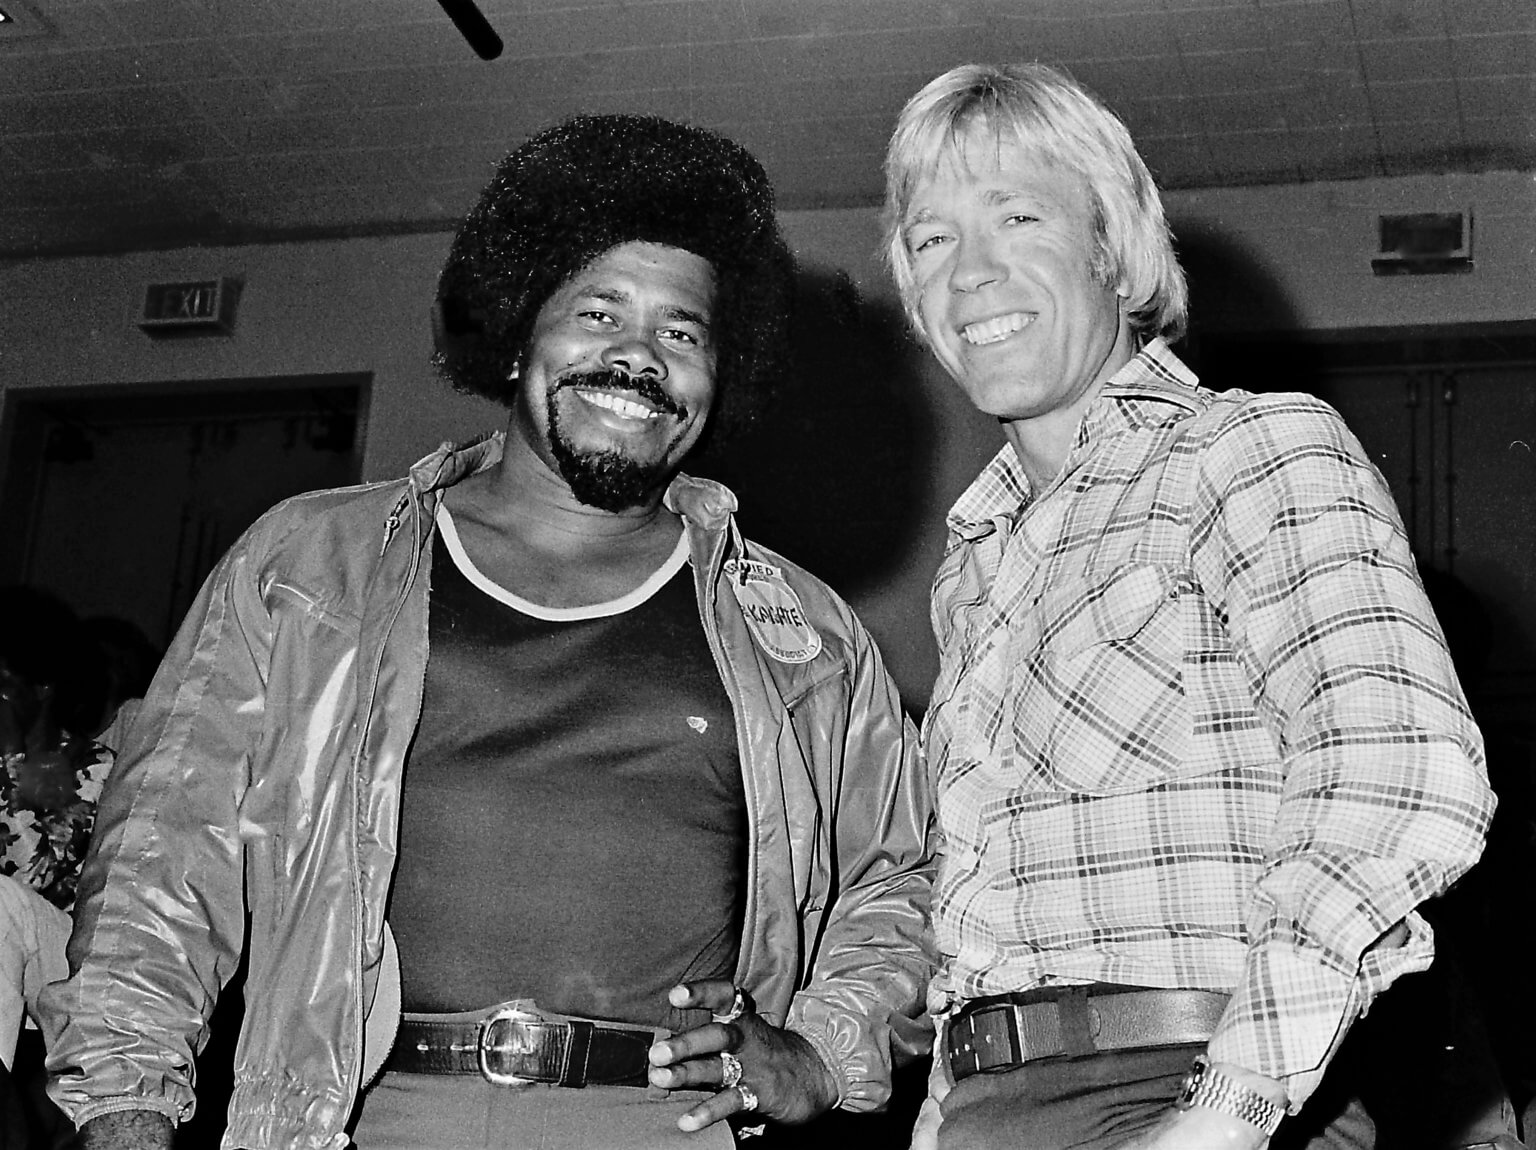 Black and white image of Vic Moore and Chuck Norris